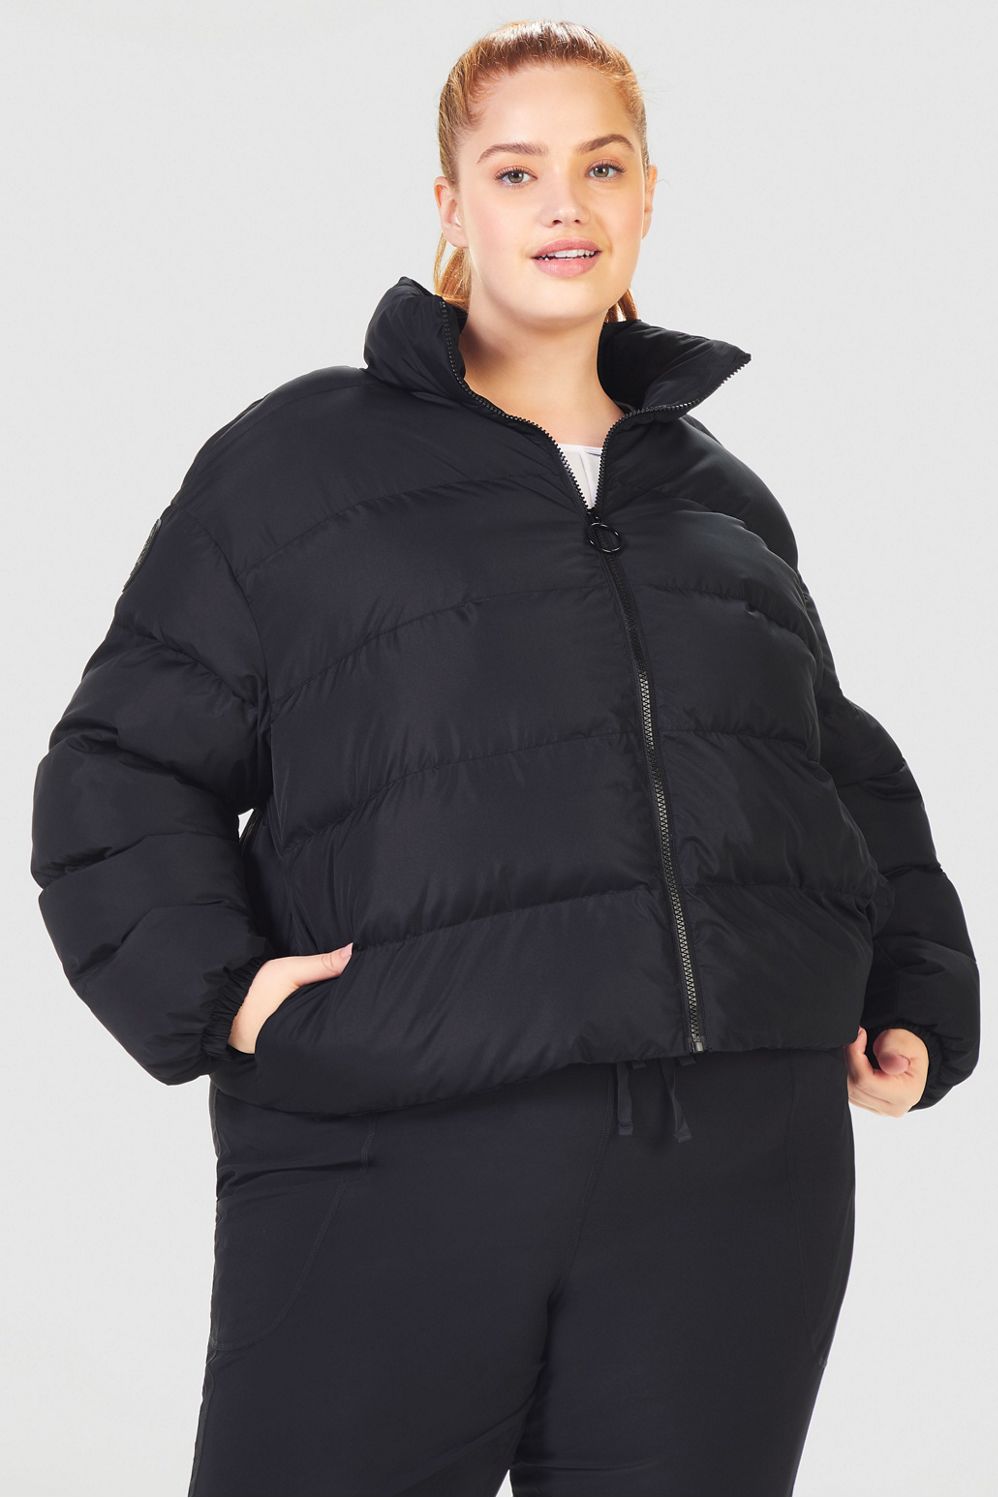 BNWT Fabletics Bryce Storm Belted Puffer Coat II Black Size XS (8